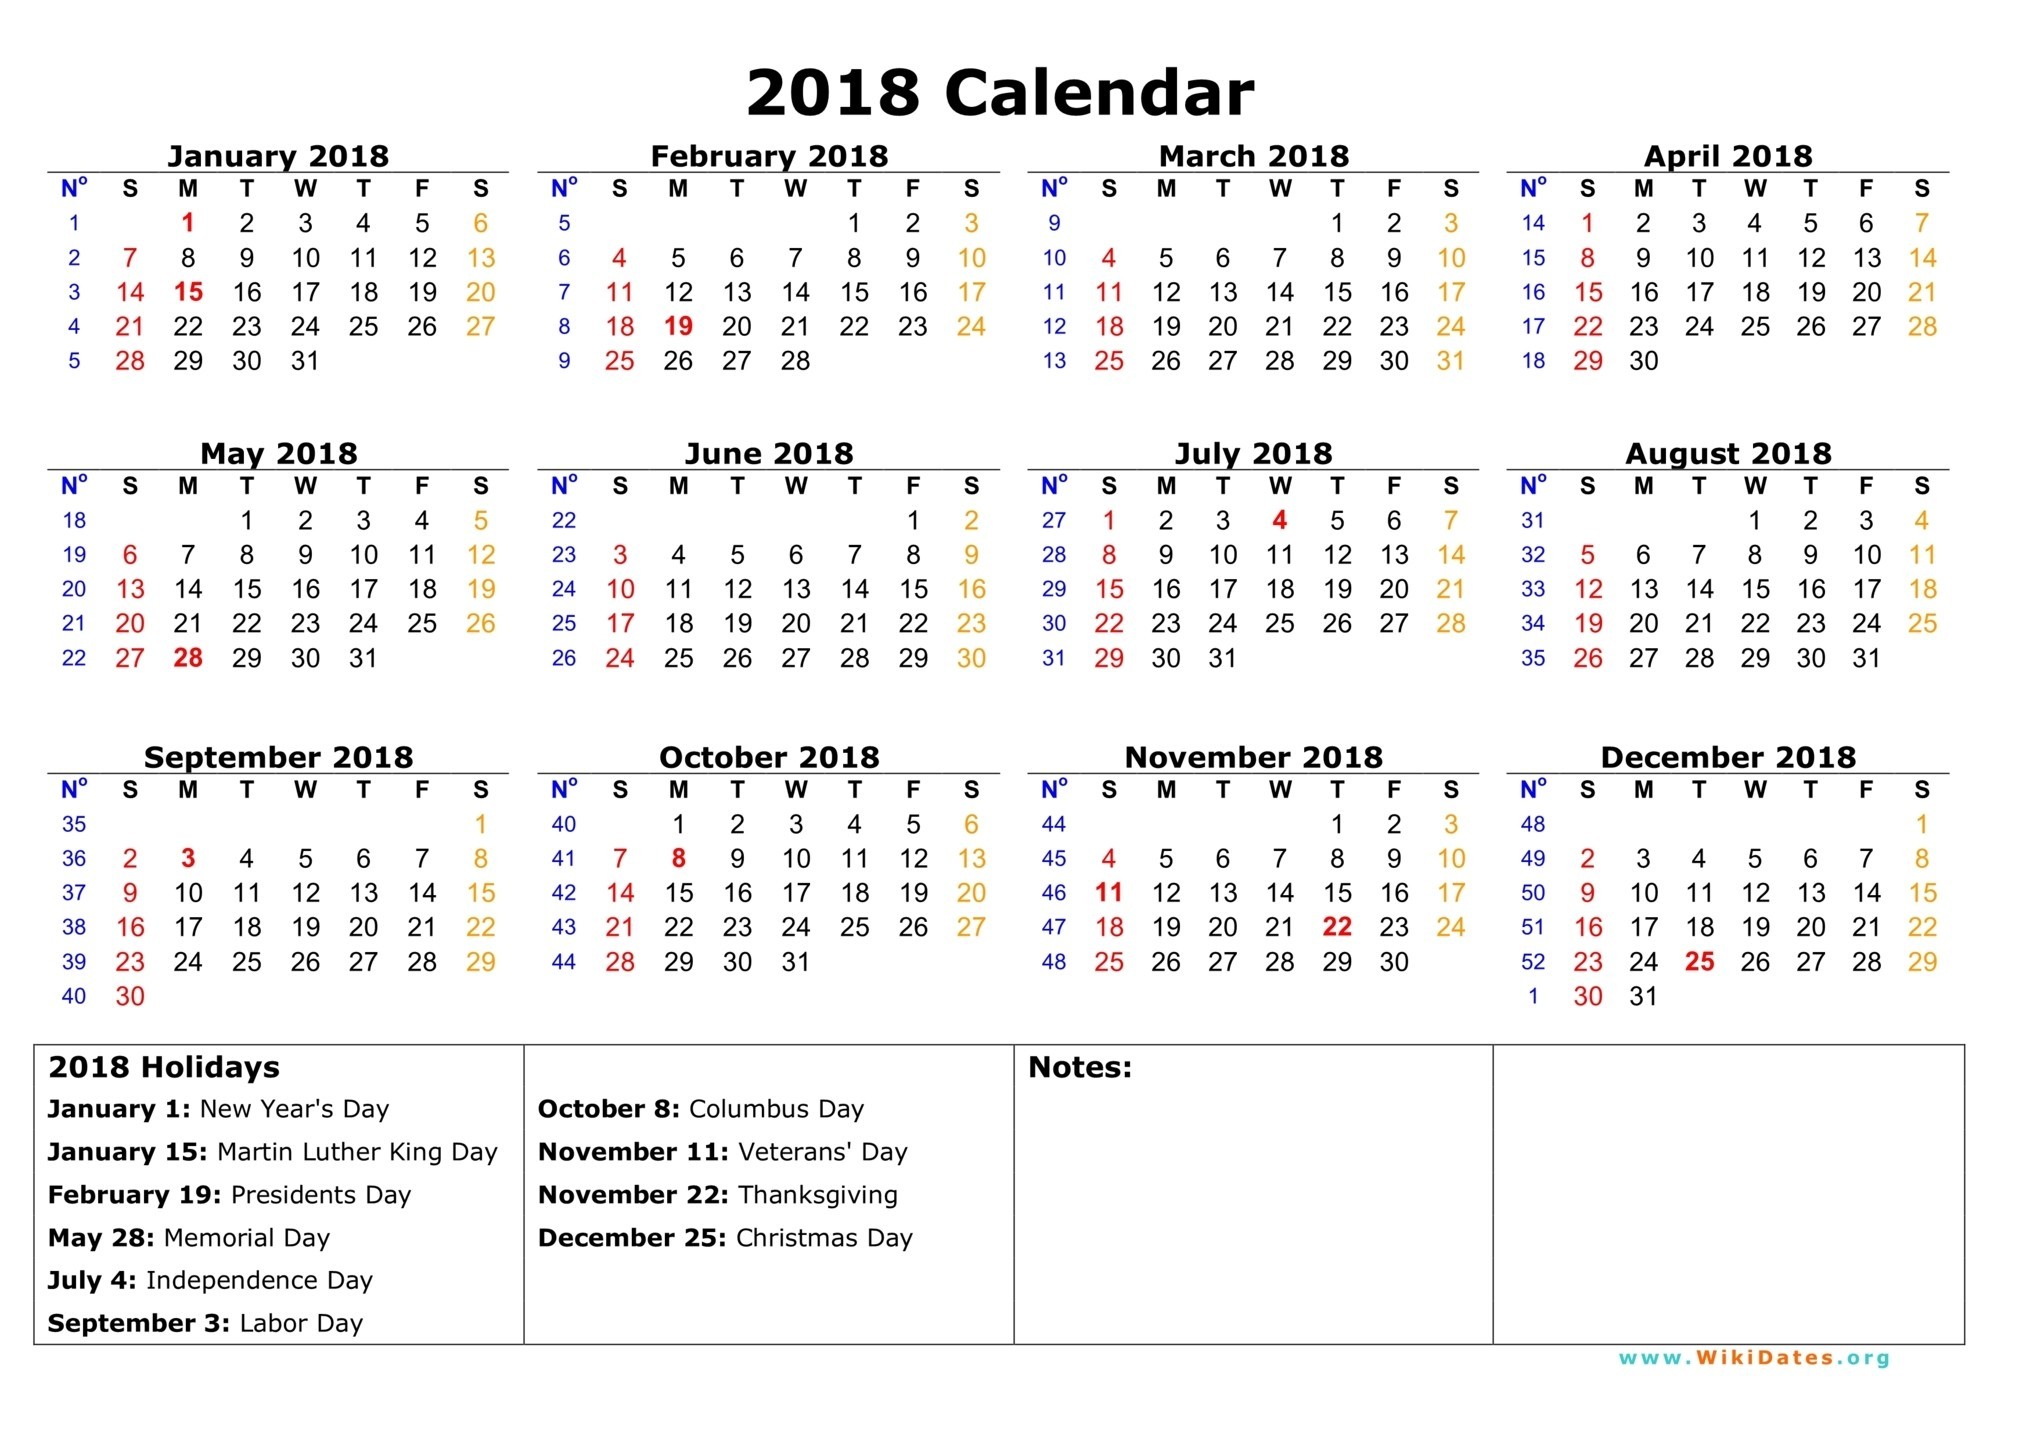 Wallpapers with Calendar 2018